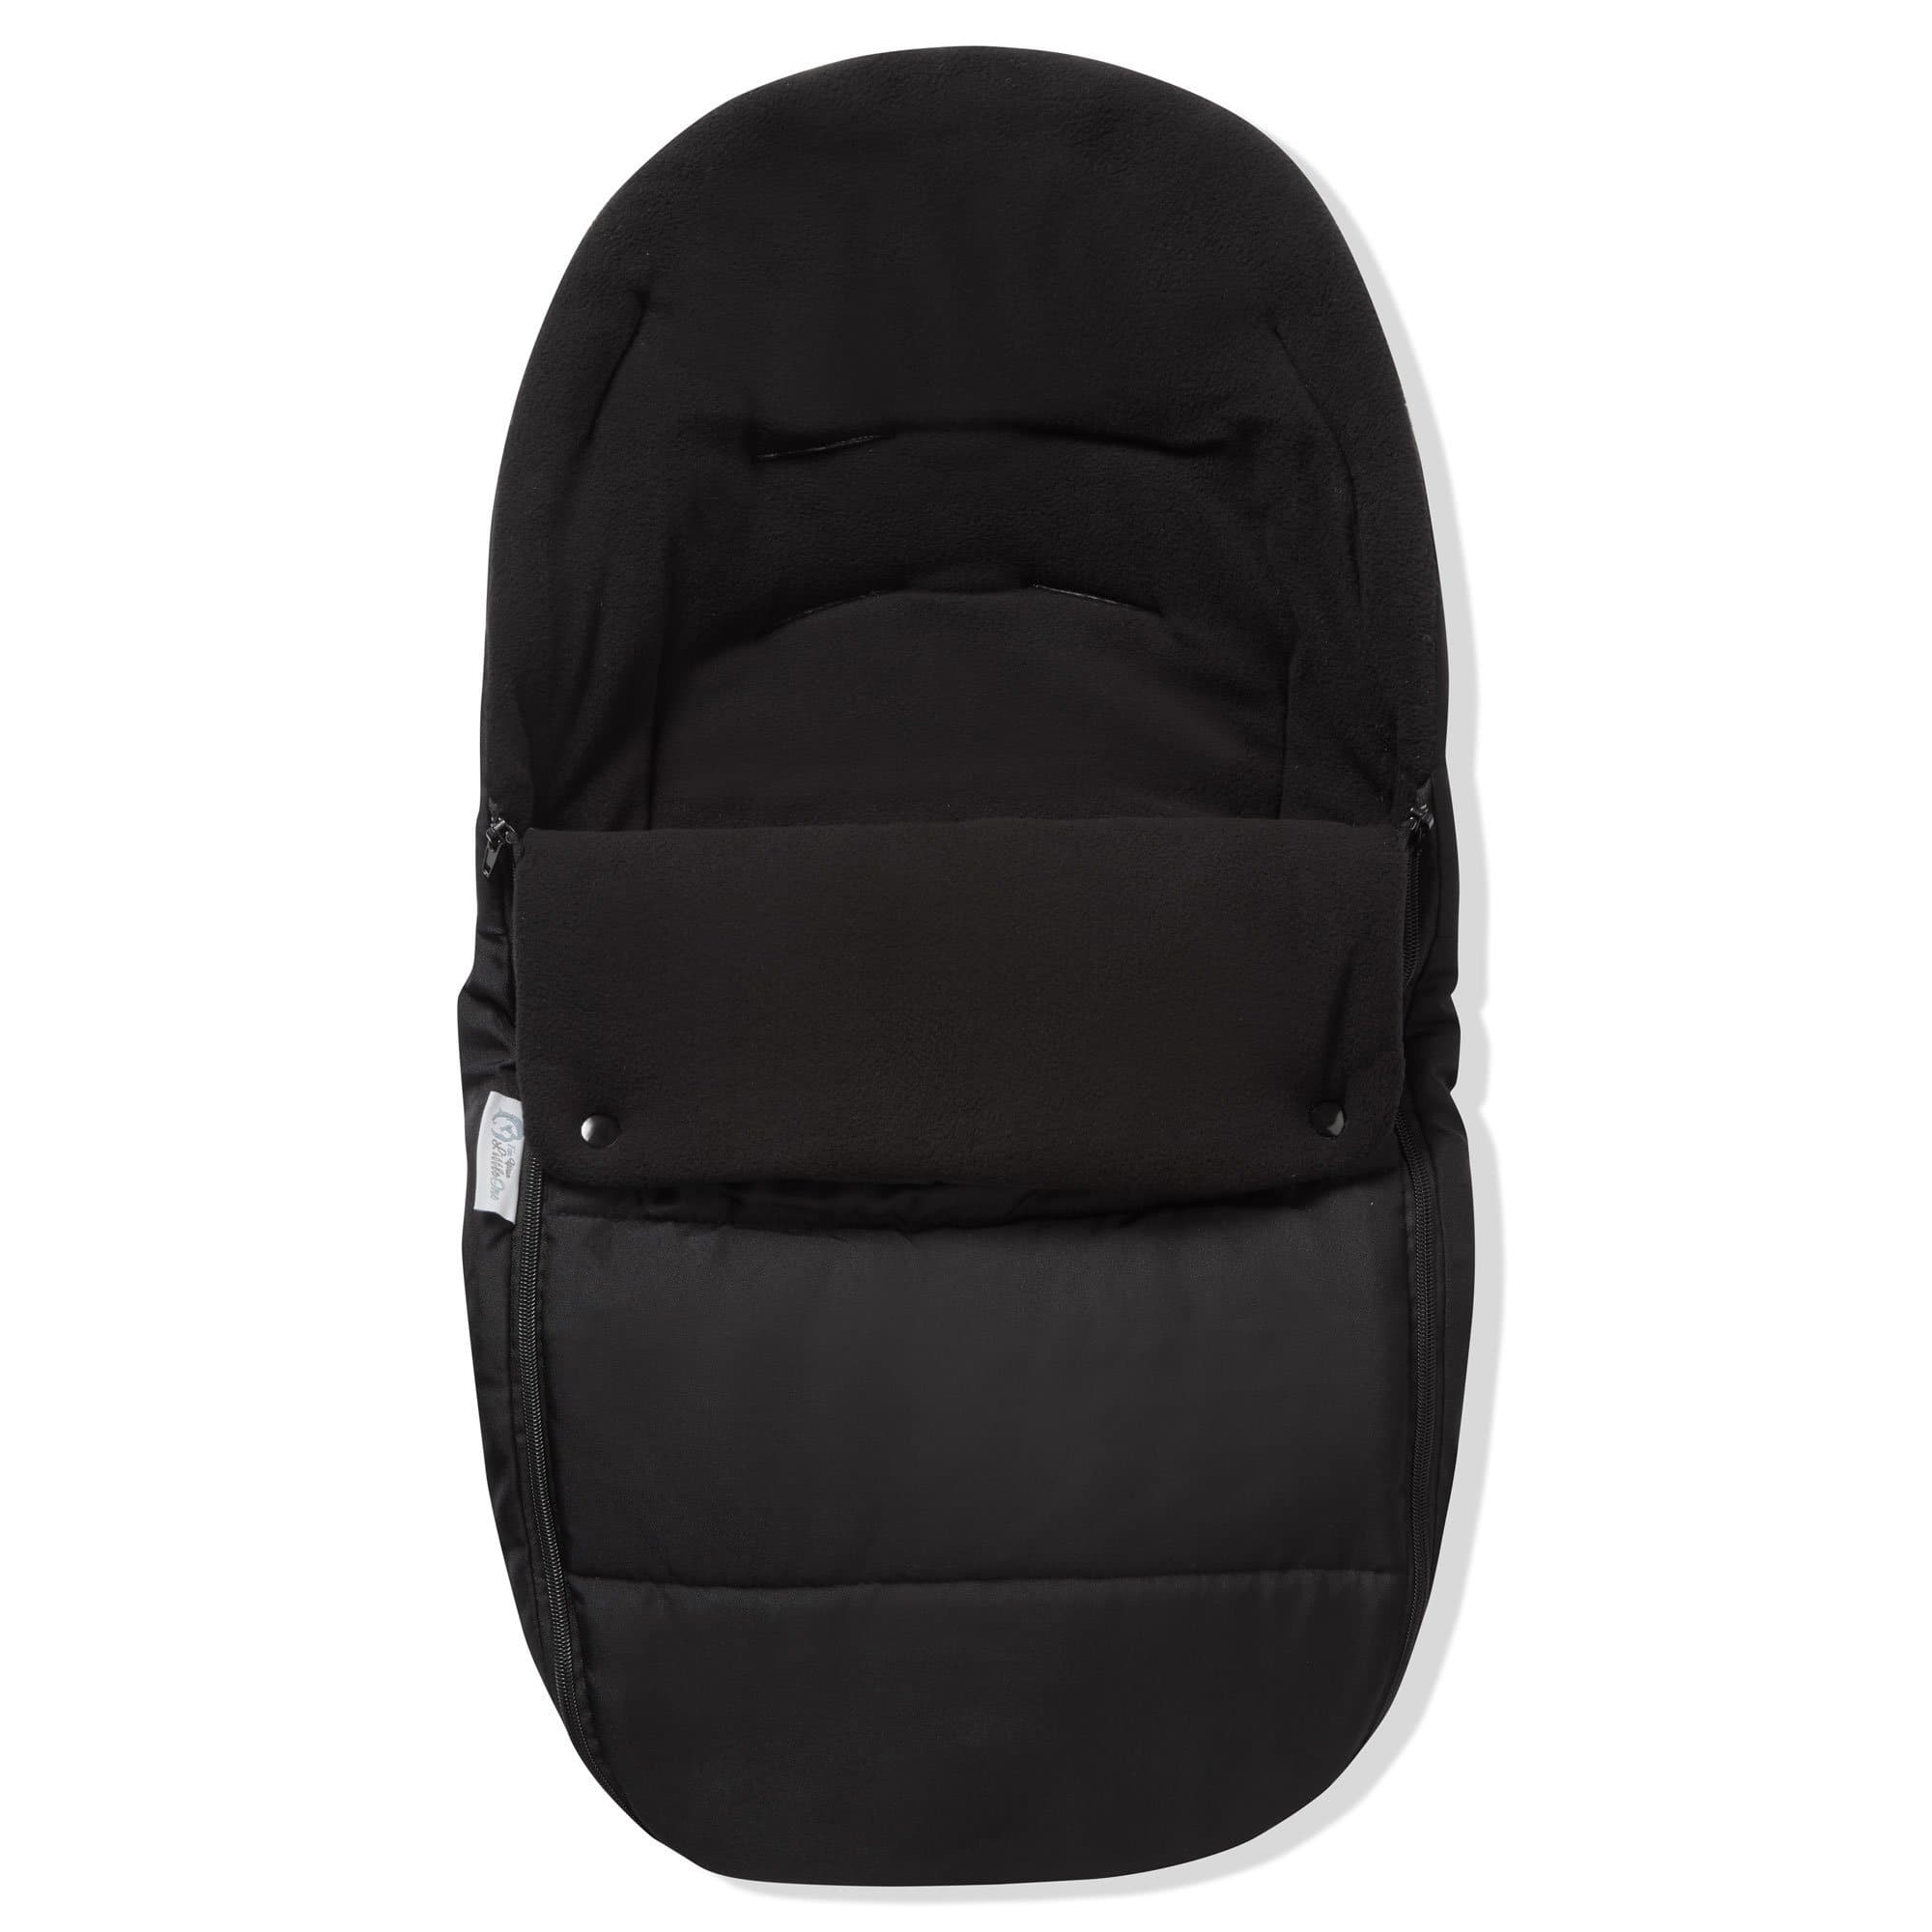 Premium Car Seat Footmuff / Cosy Toes Compatible with BeSafe - Black Jack / Fits All Models | For Your Little One